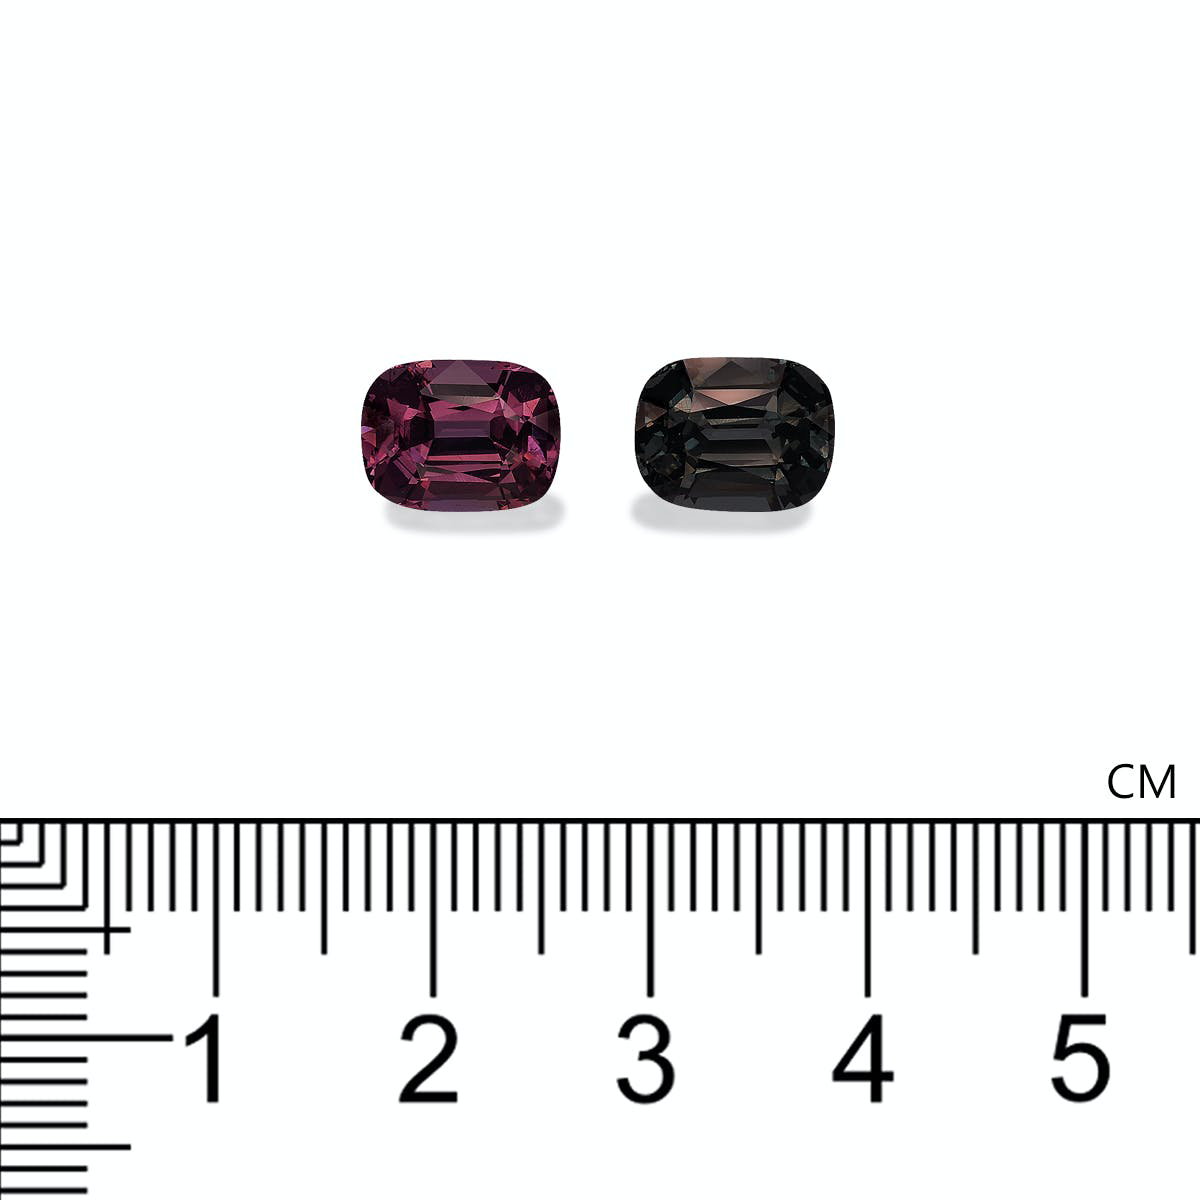 Picture of Compliment Colour Spinel 5.29ct - 9x7mm Pair (SP0085)